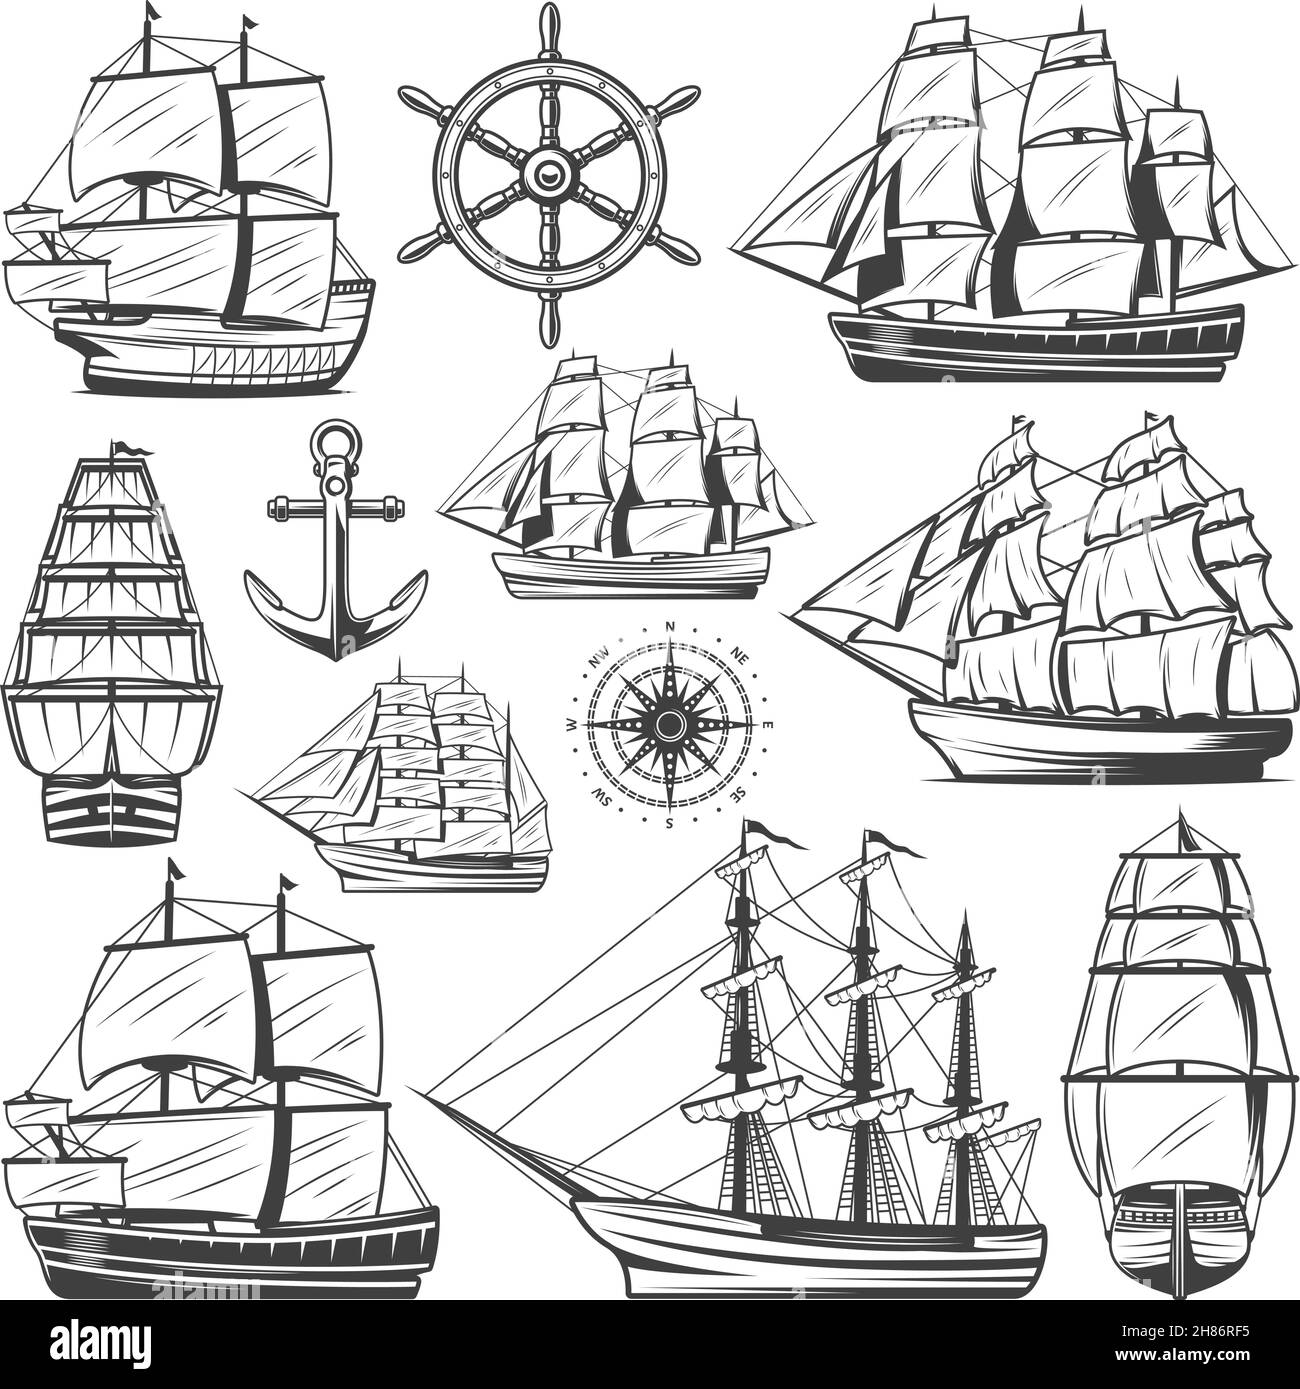 Vintage big ships collection with different vessels boats steering wheel anchor and navigational compass isolated vector illustration Stock Vector